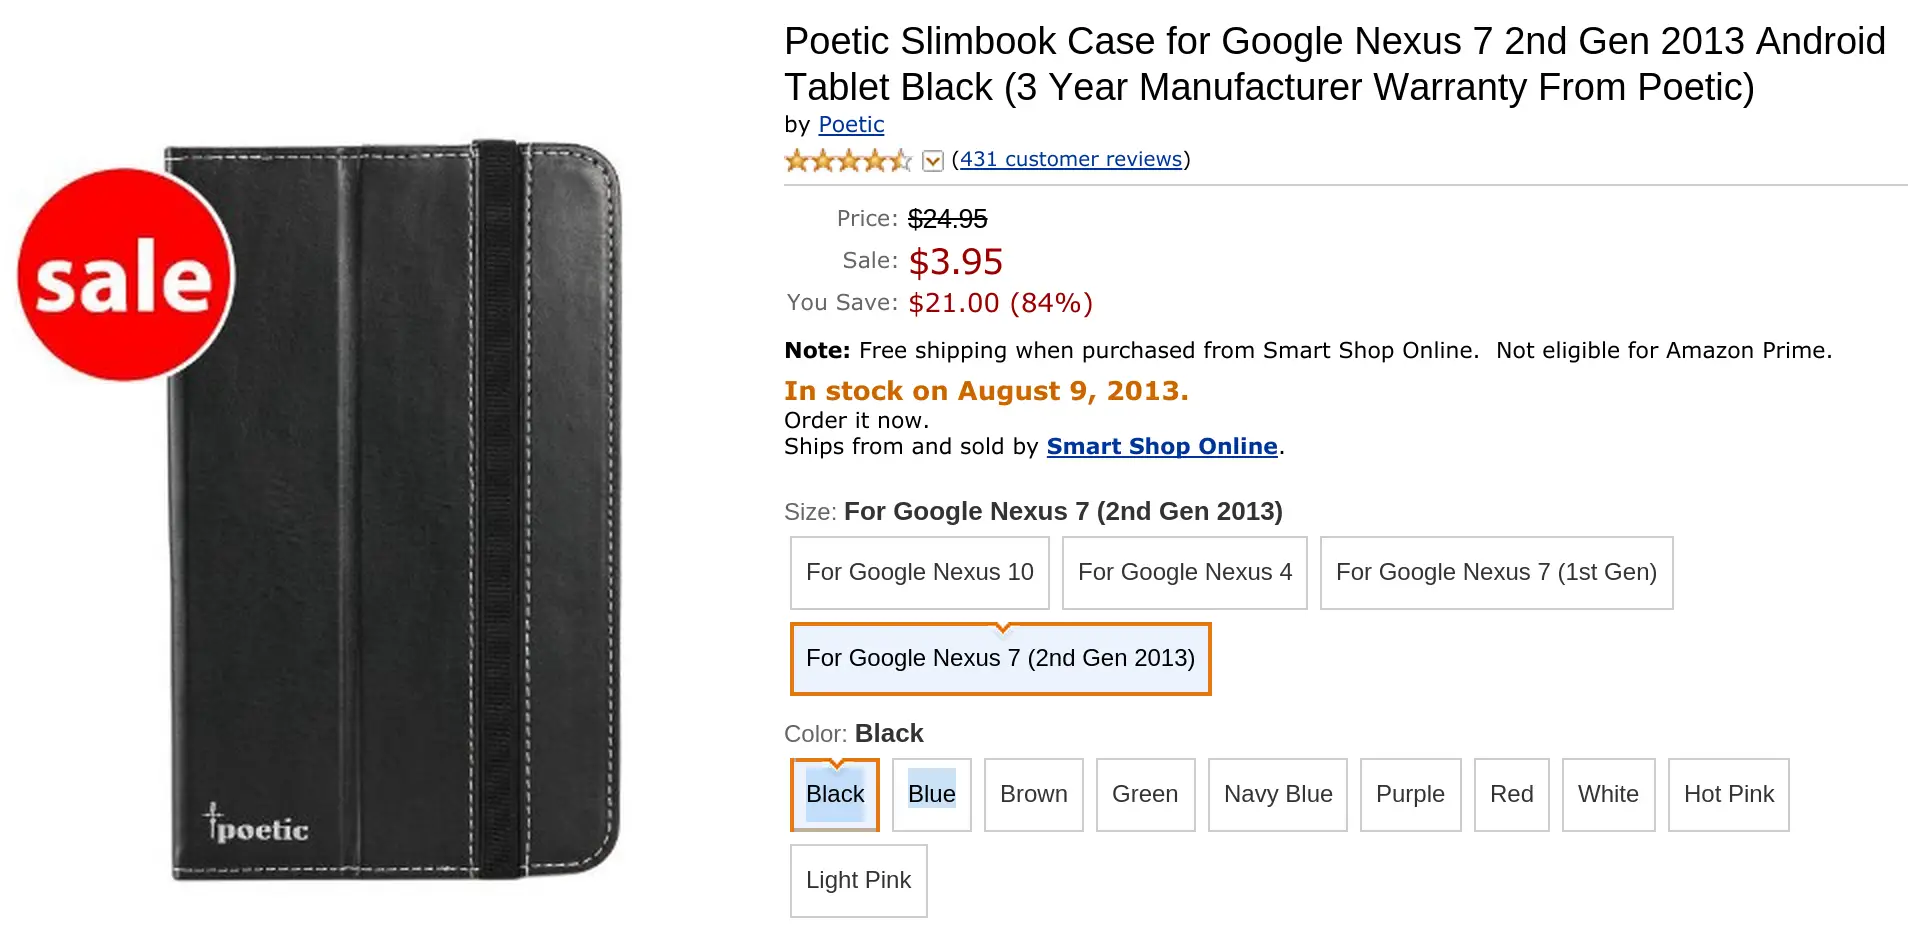 Poetic case deal Amazon - for some reason we don't have an alt tag here